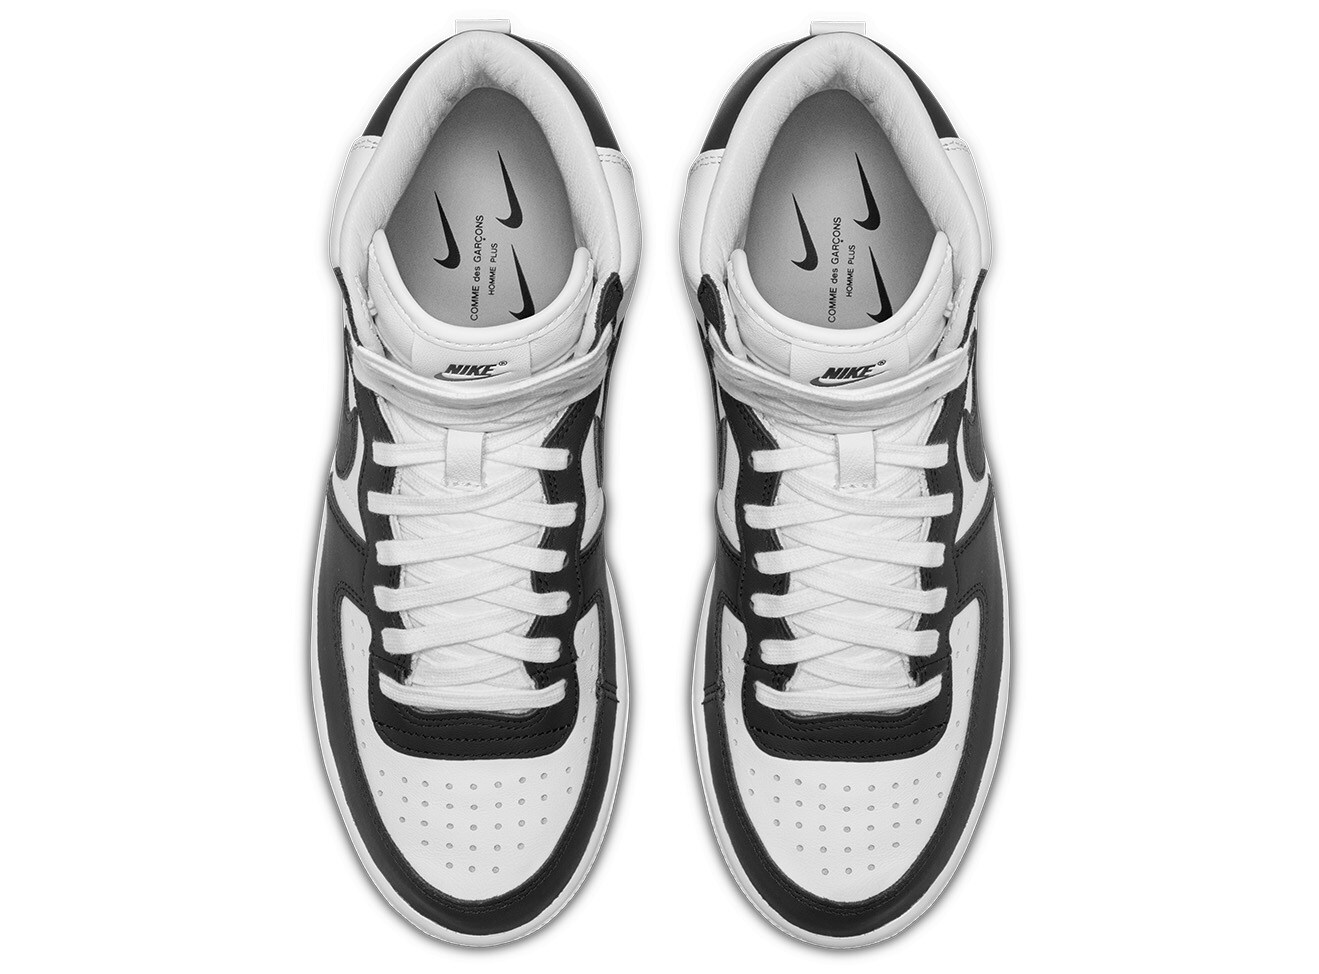 A top view close up of Comme des Garcons Homme x Nike shoes.